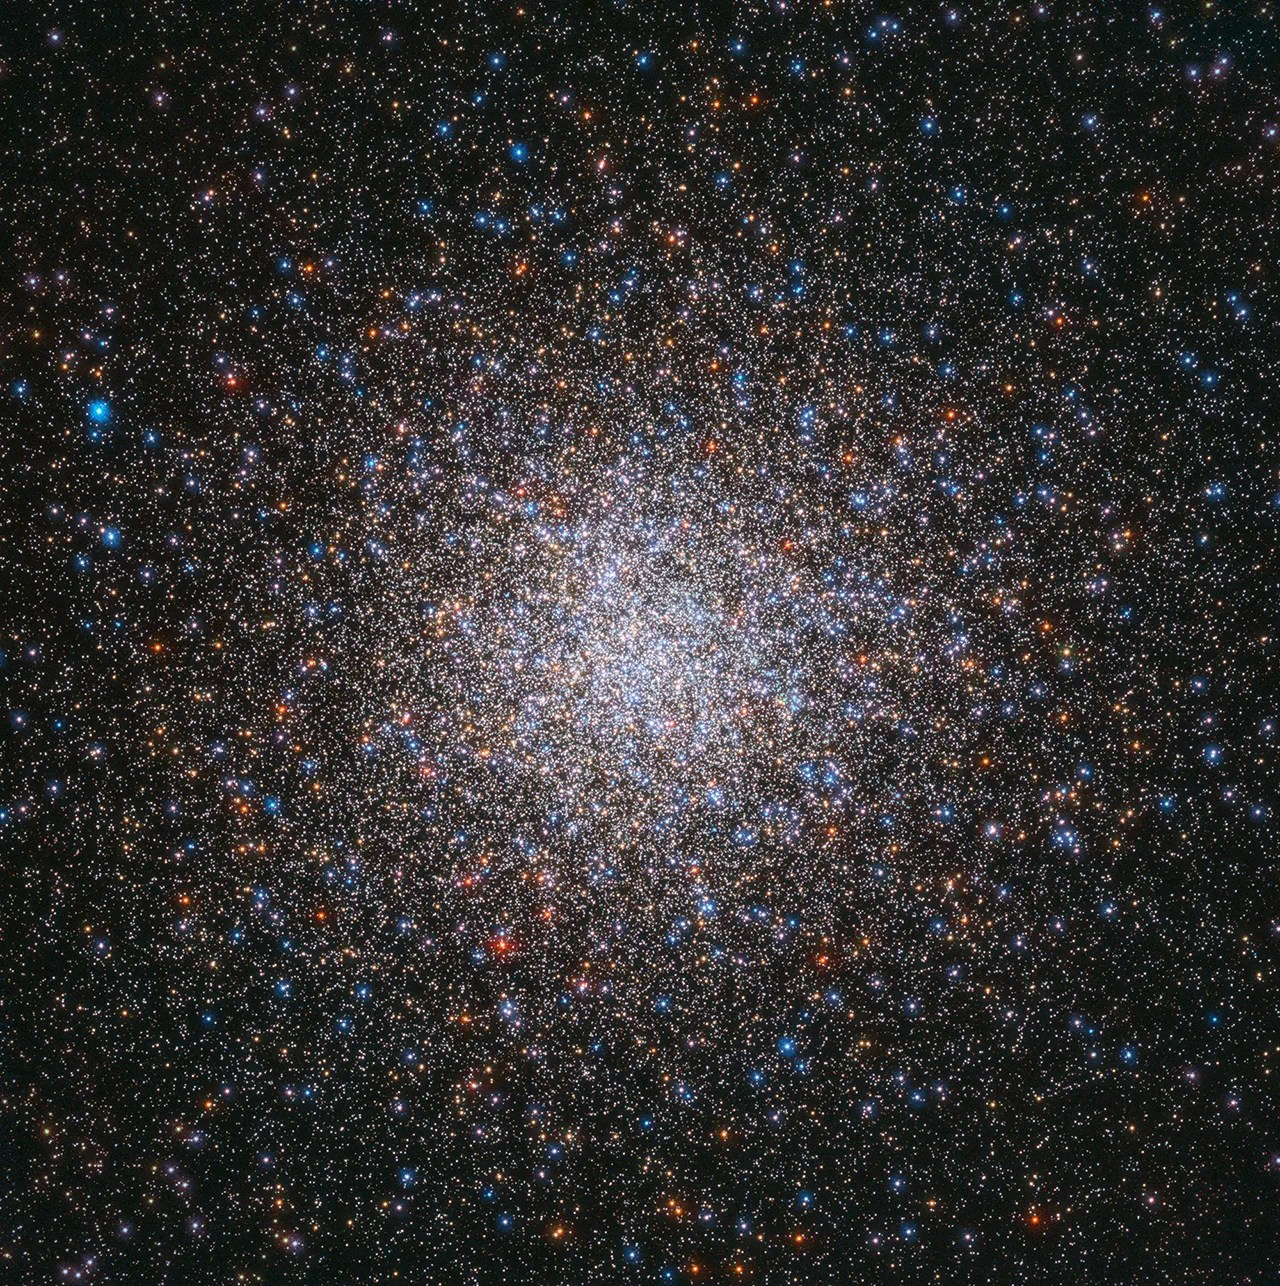 Hubble image of messier 2